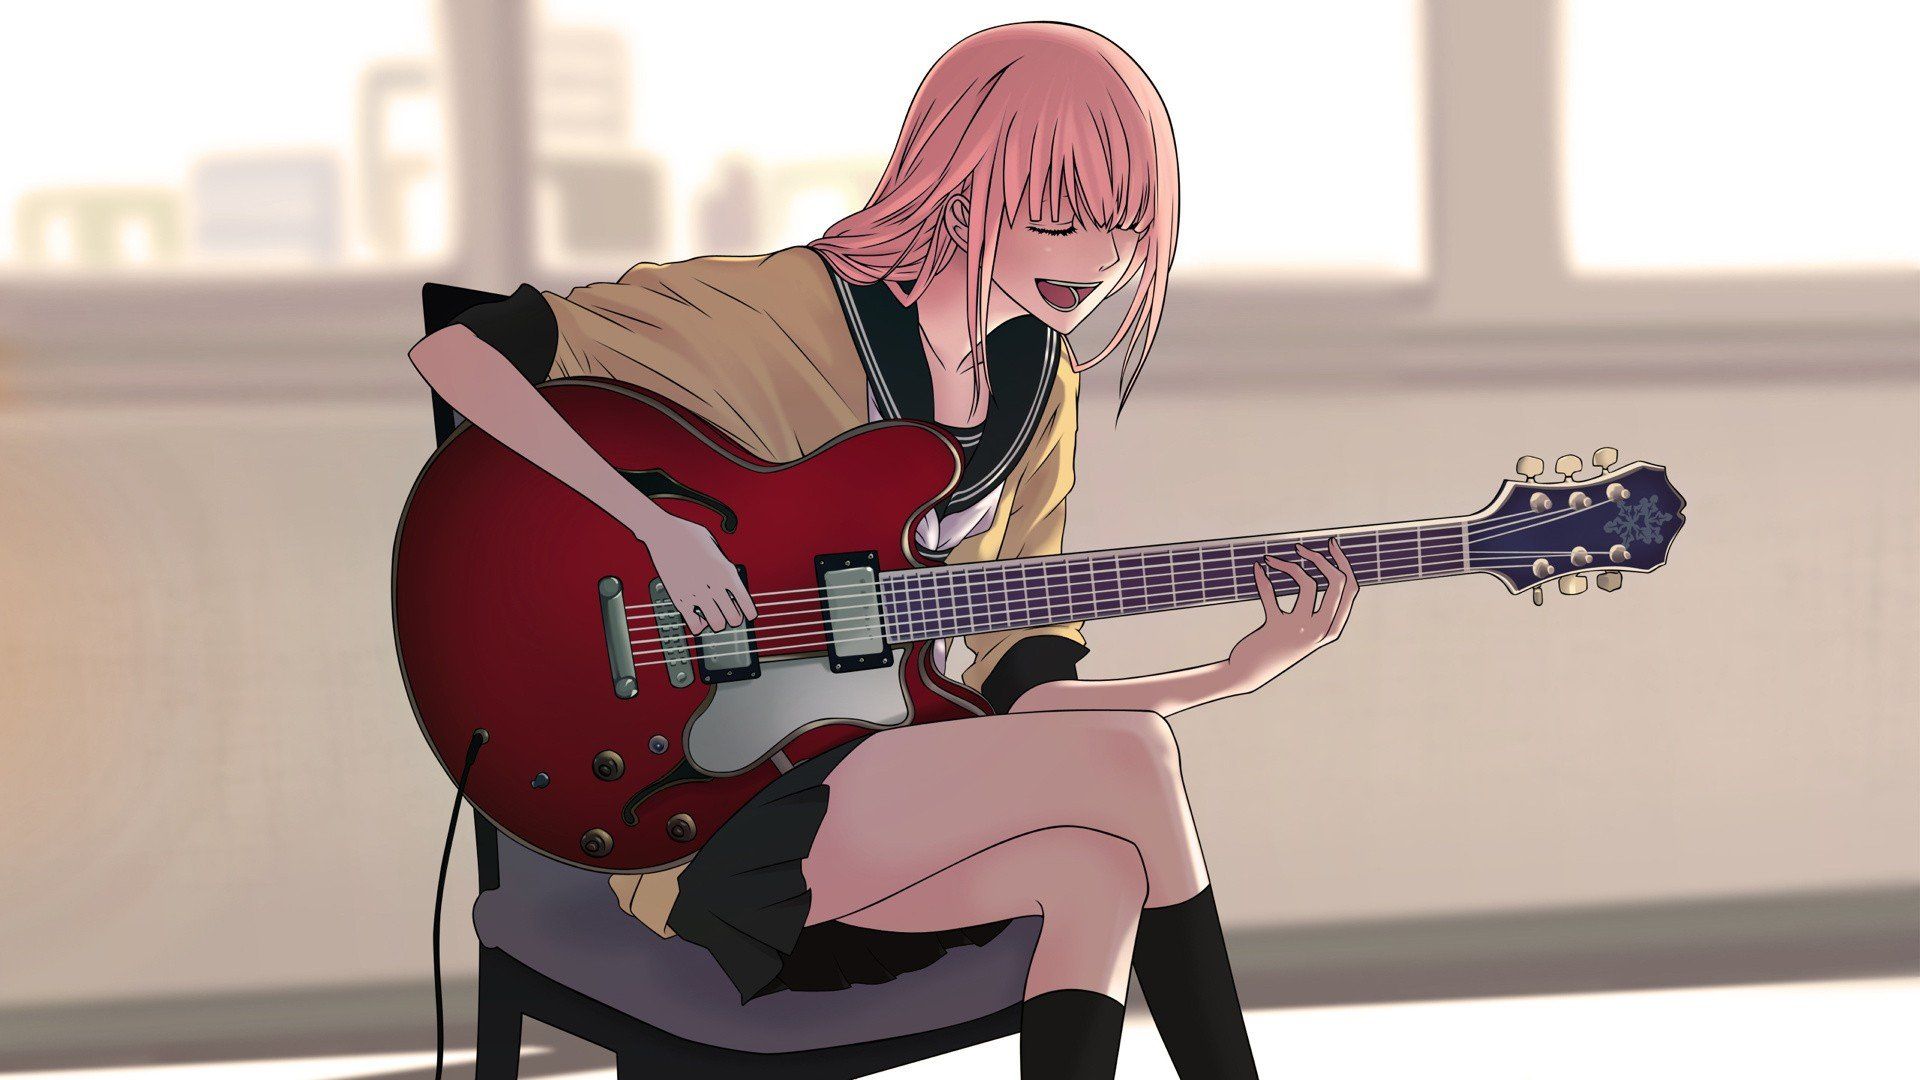 Anime Guitar Drawing by T3ssailoveu - DragoArt